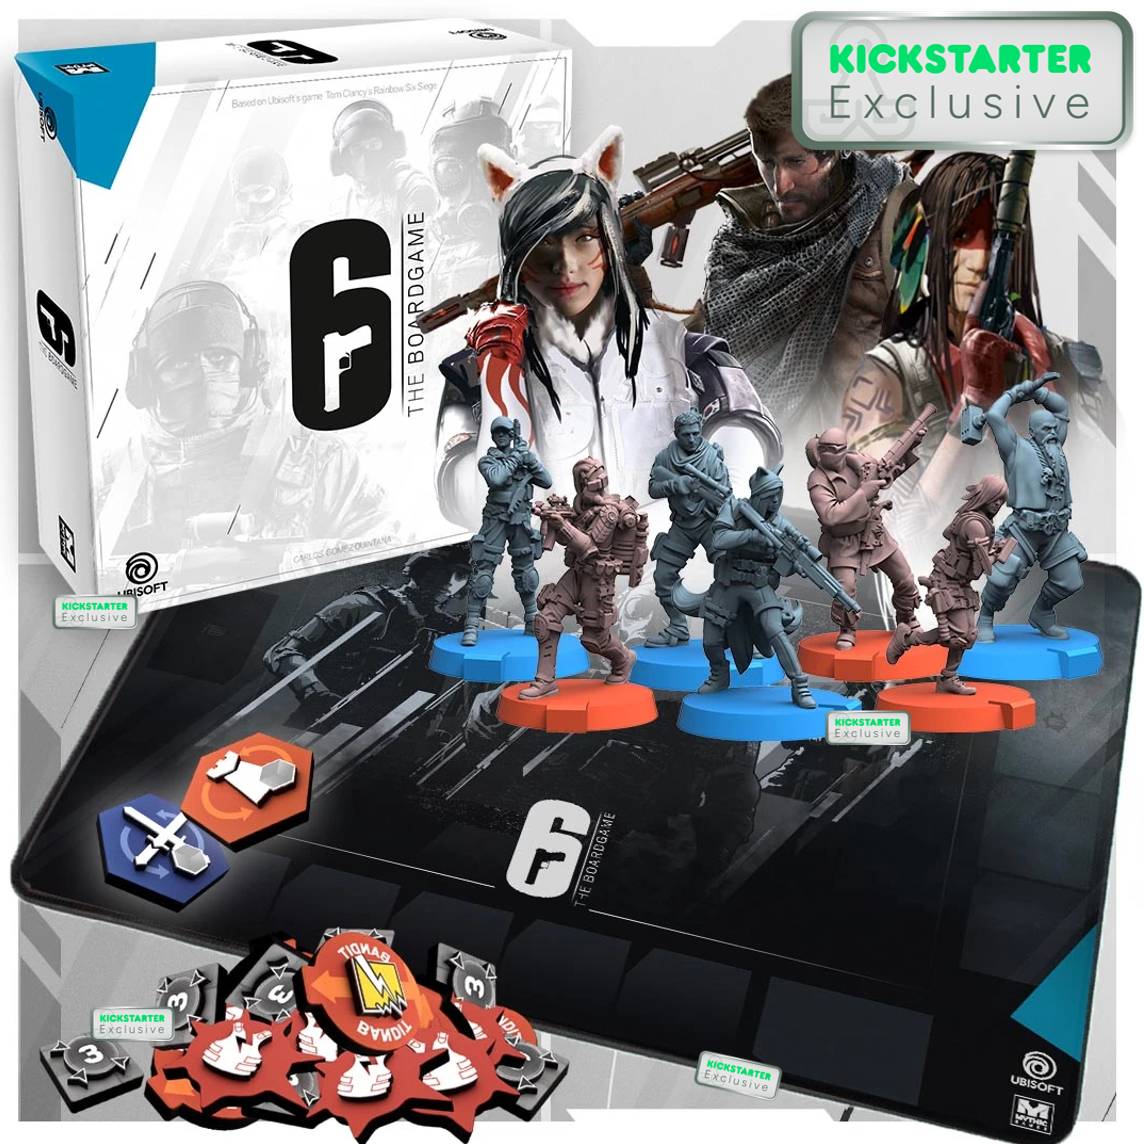 6: Siege - The Board Game Verified Smooth Operator All-In (Includes All Kickstarter Exclusive Content)